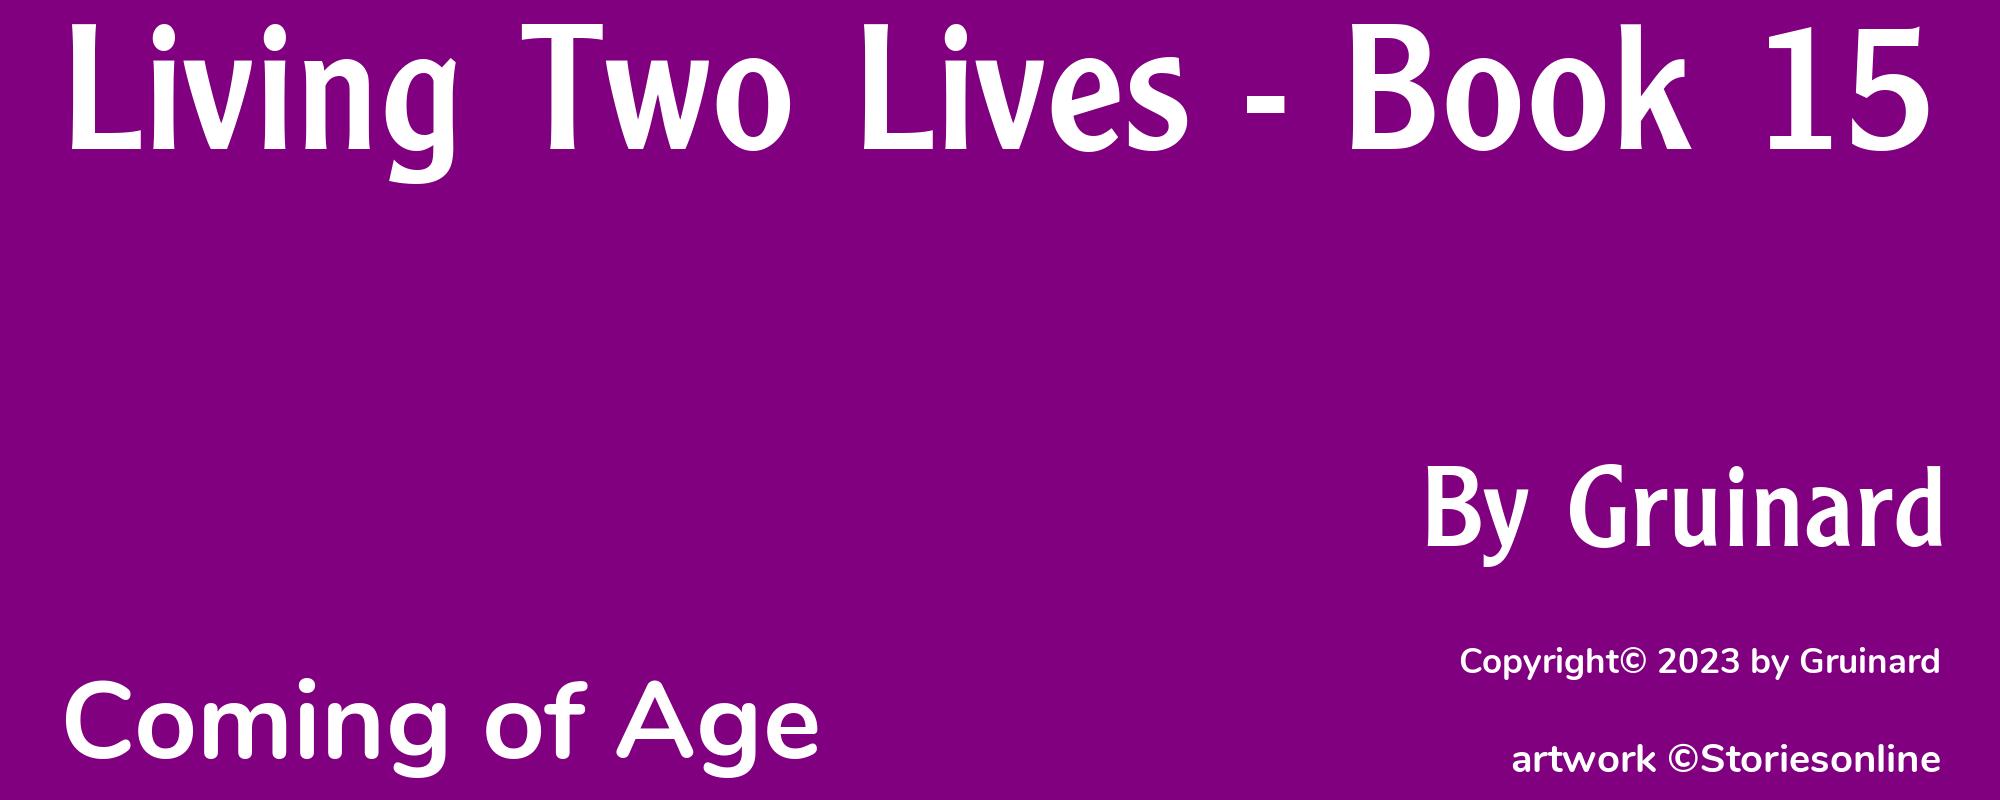 Living Two Lives - Book 15 - Cover